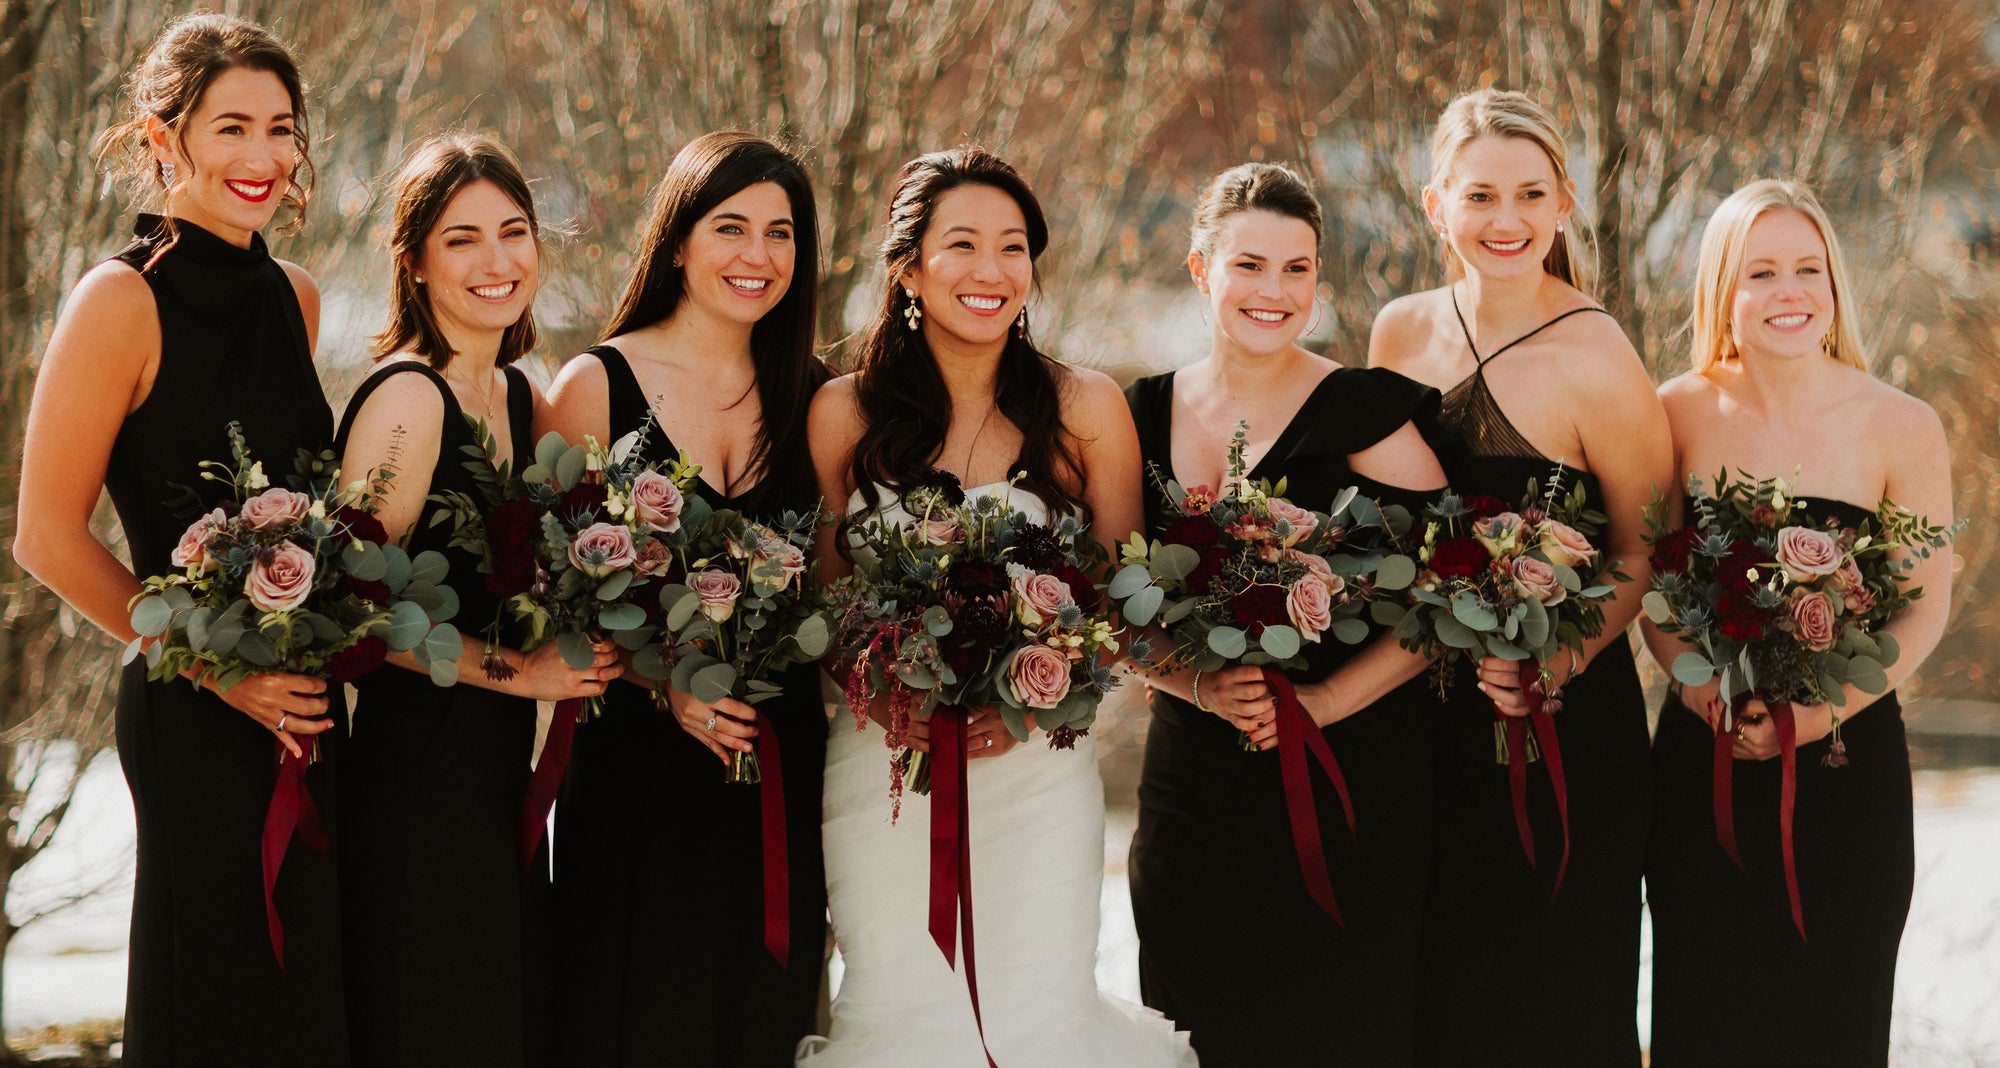 Winter Wedding at The Roundhouse in Beacon, NY in the Hudson Valley. Burgundy and blush bridal bouquet.